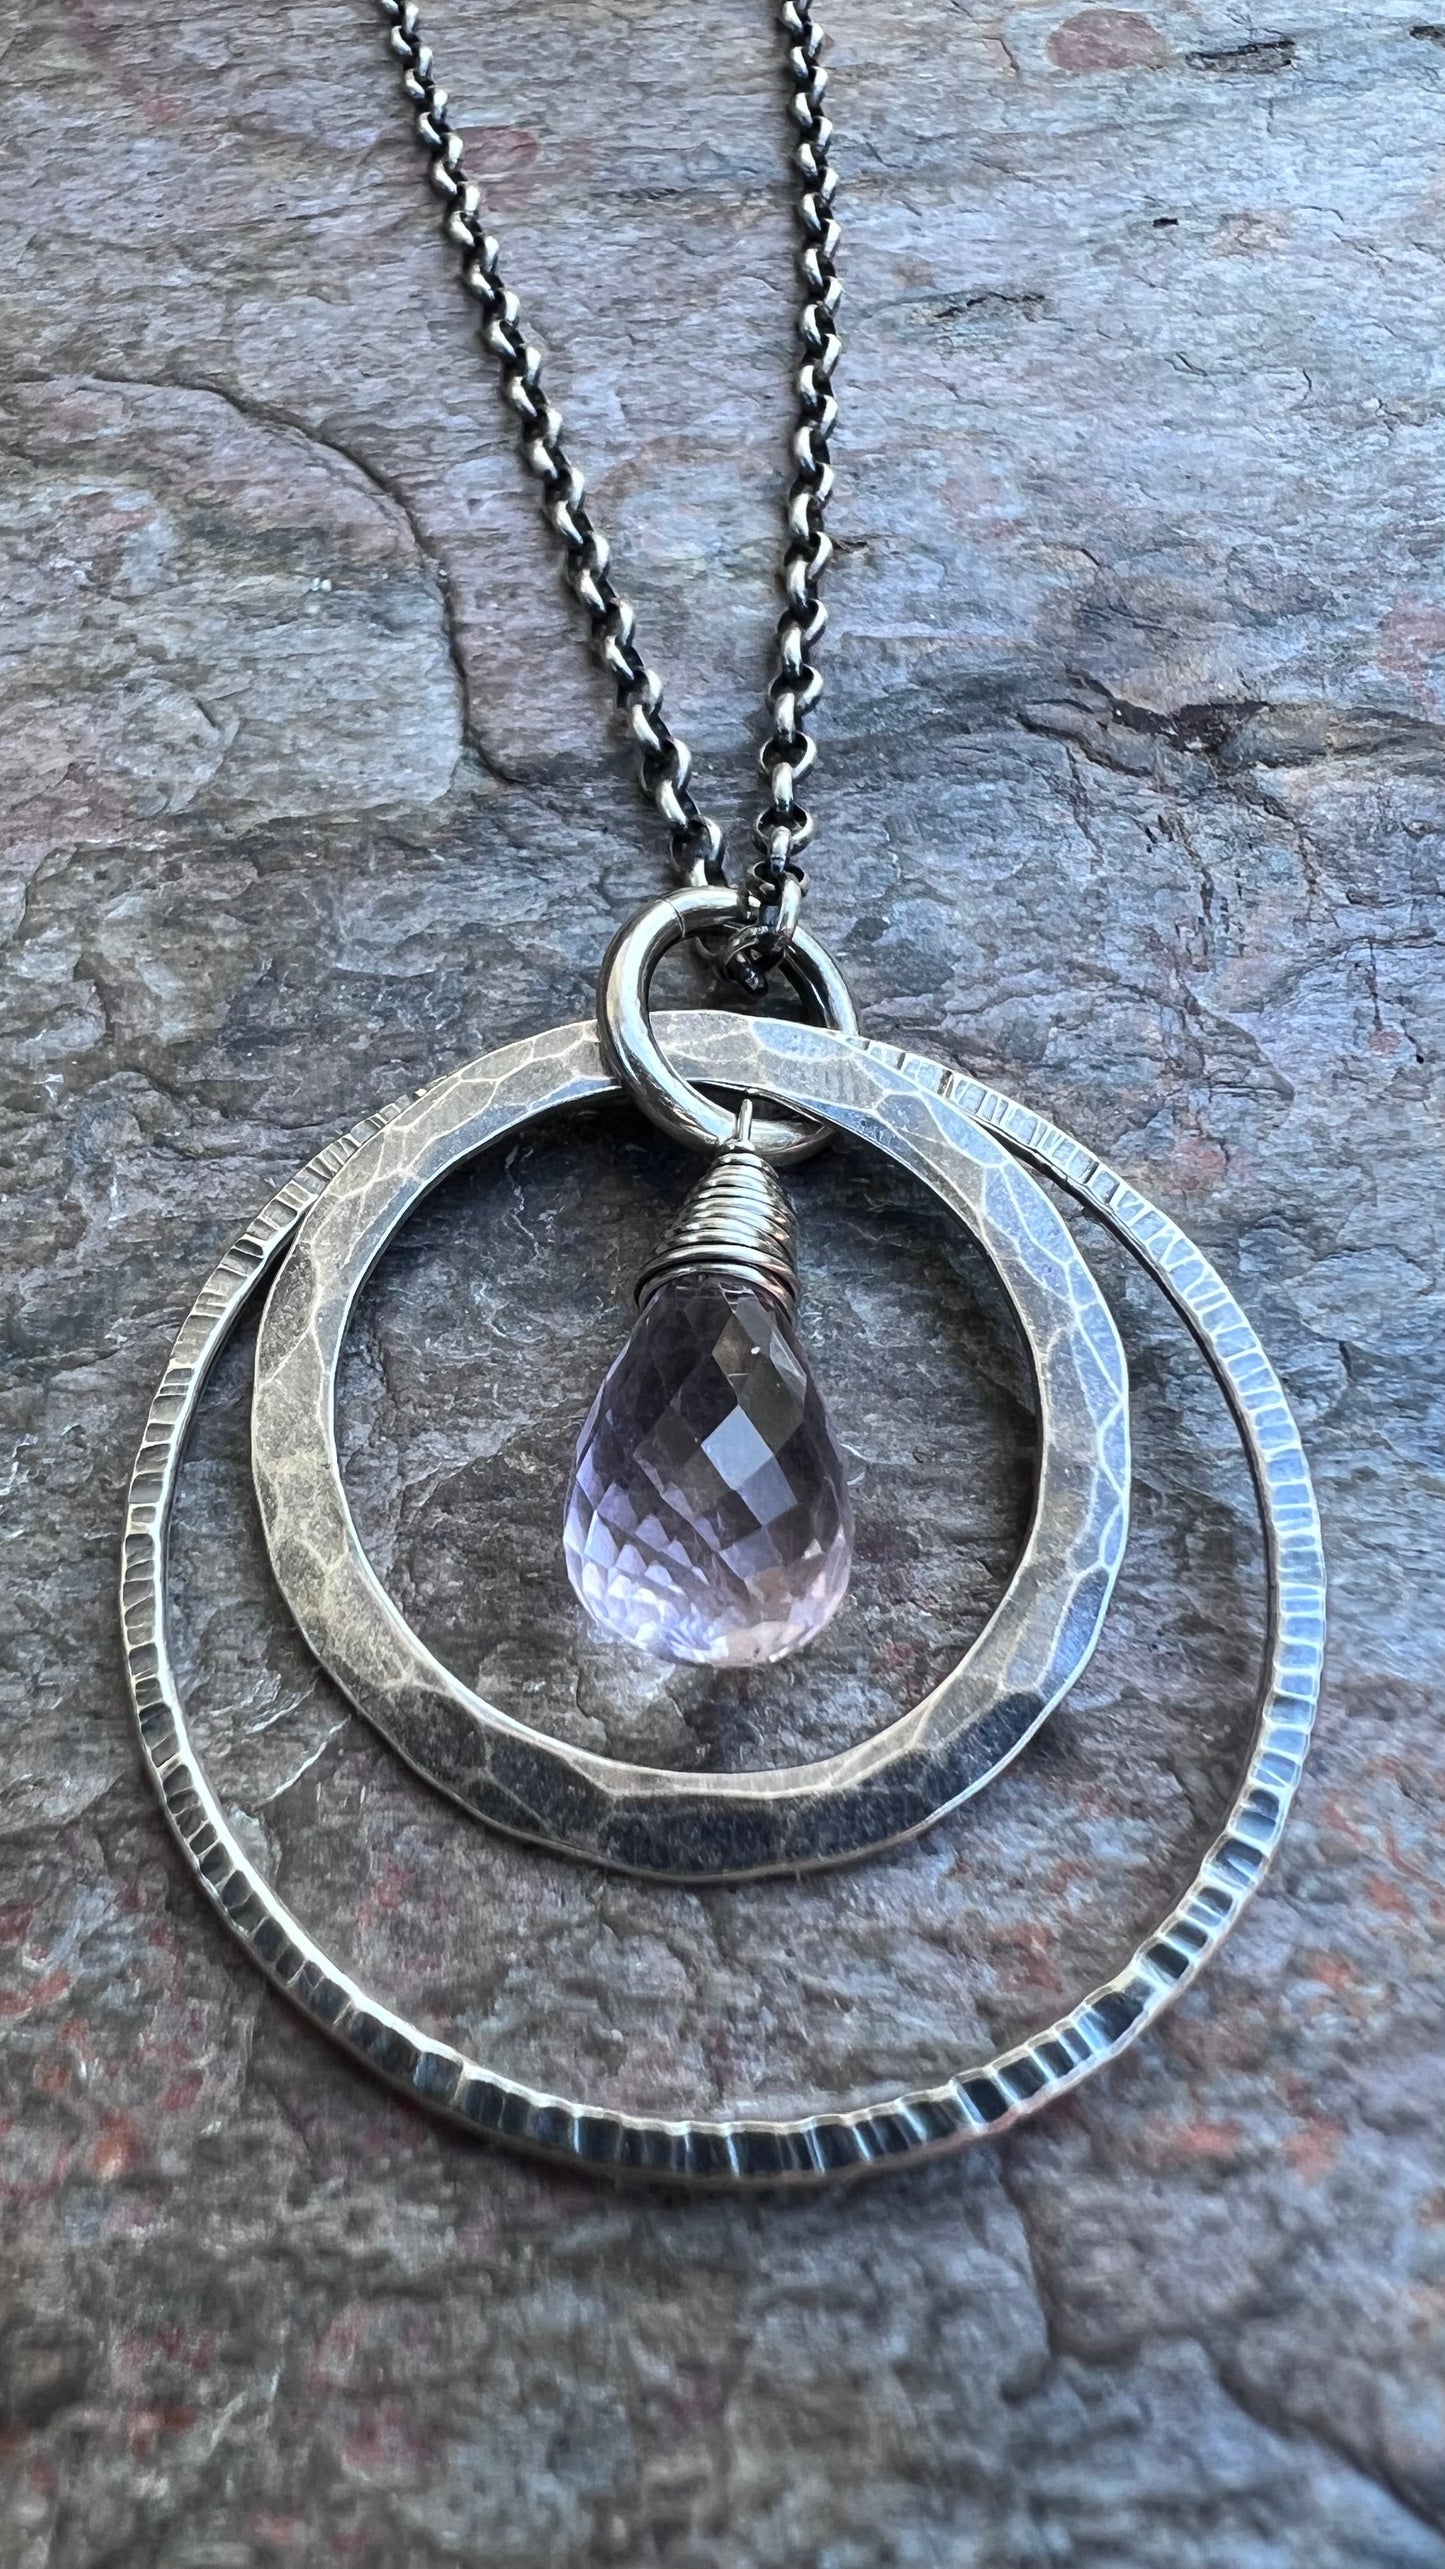 Pink Amethyst Sterling Silver Necklace - Genuine Pink Amethyst and Hammered Sterling Silver Pendant on Sterling Silver Chain